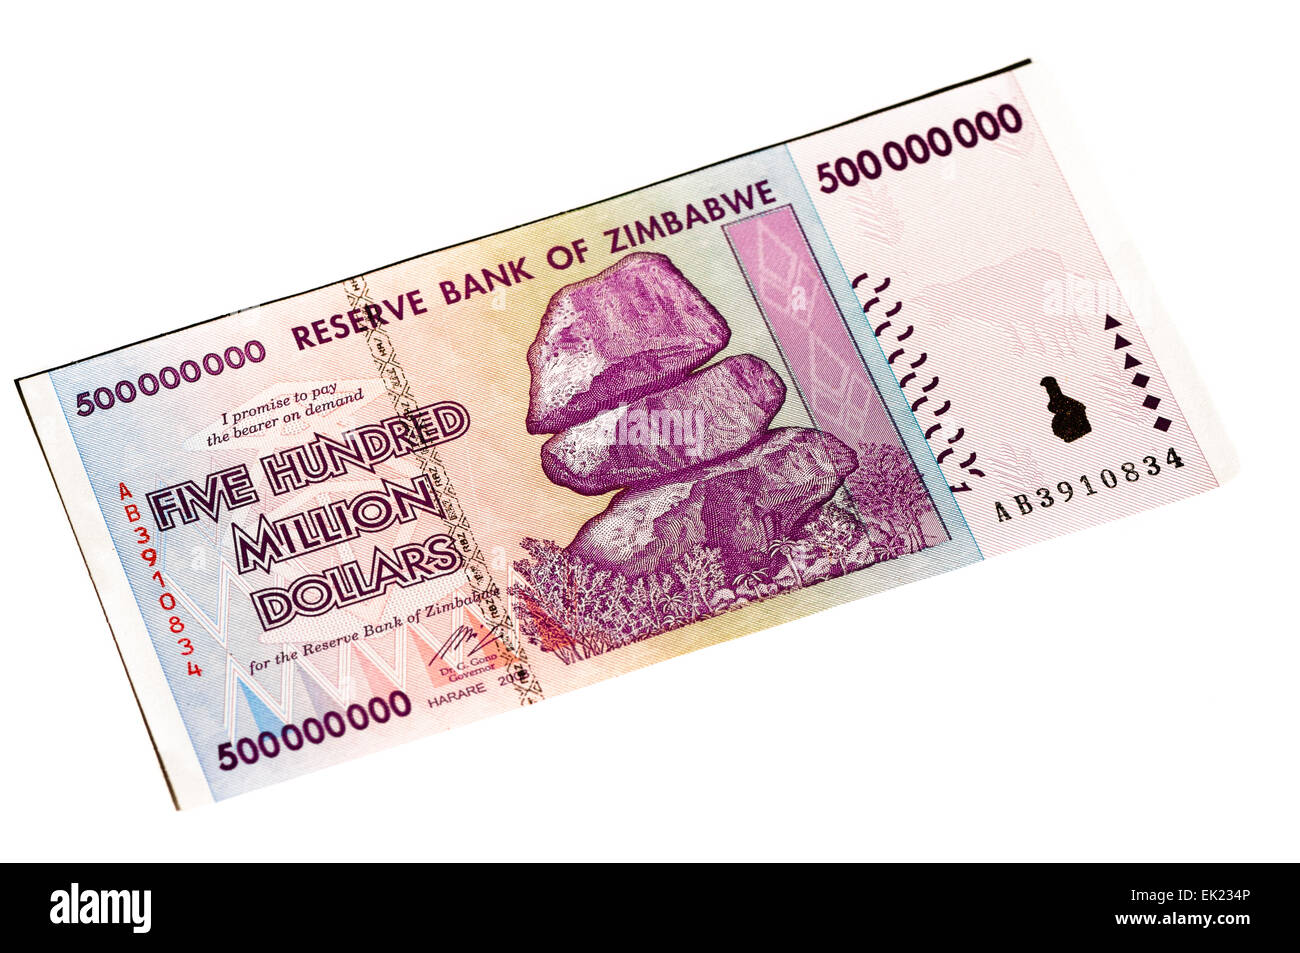 Five hundred million dollar (500,000,000 dollars) bank note from Bank of Zimbabwe, 2009, as a result of hyperinflation. Note: this is now obsolete Stock Photo